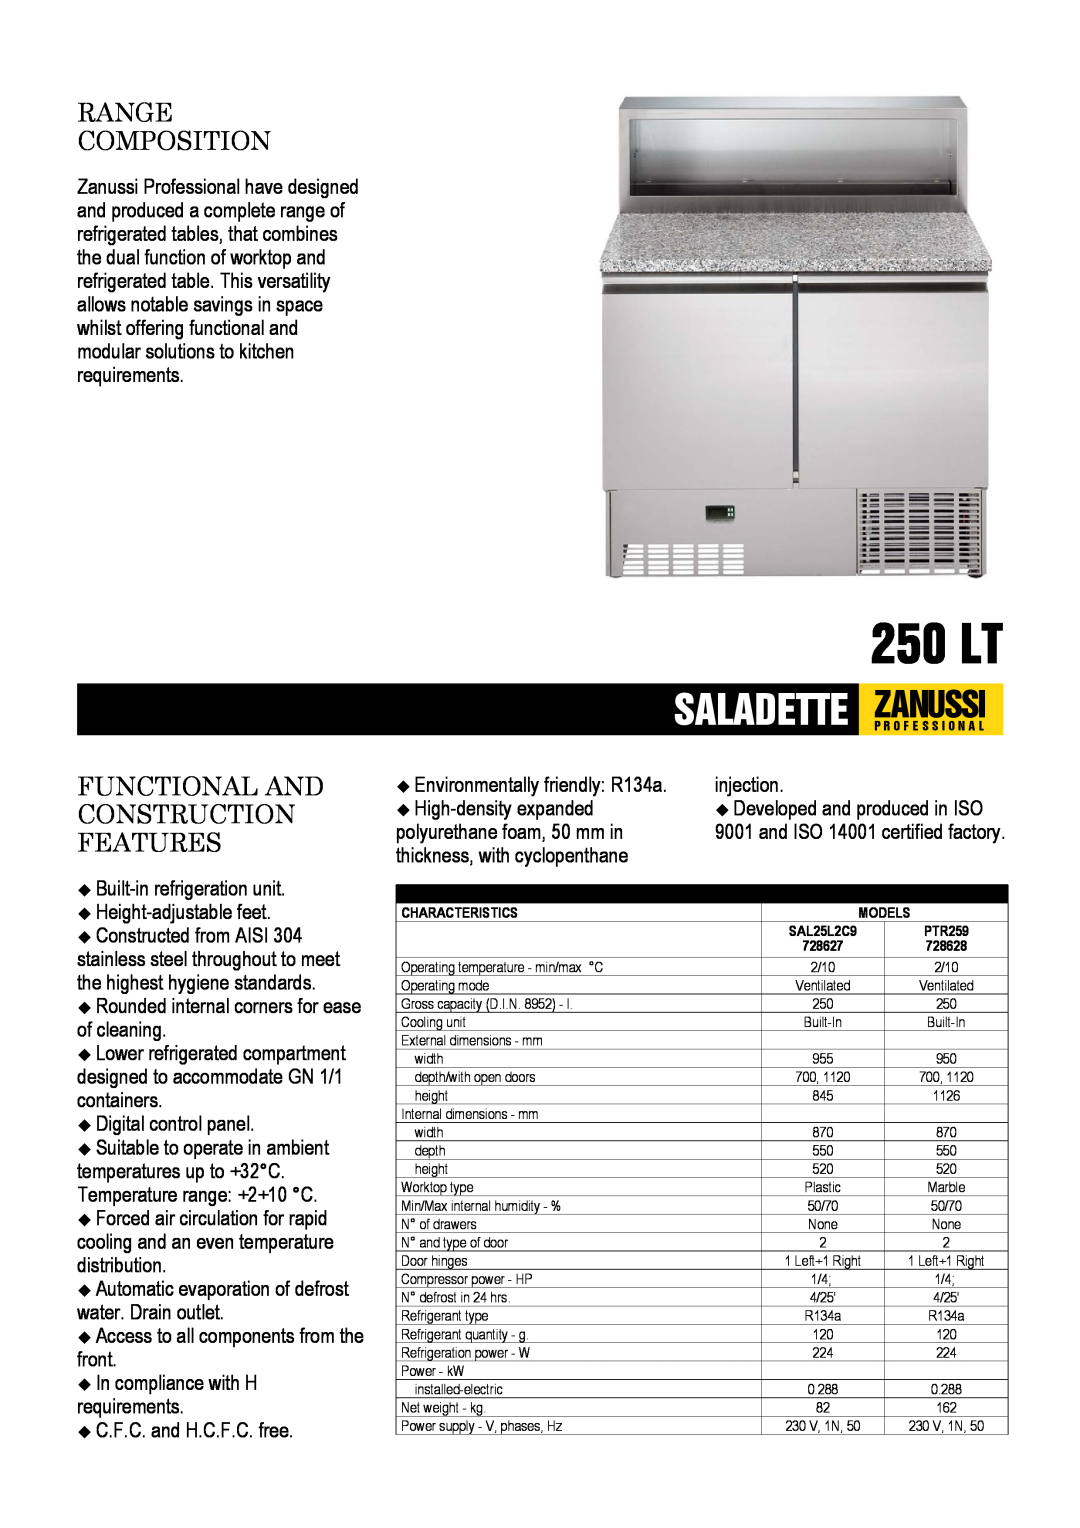 Zanussi 728628, 728627 dimensions Zanussi, 250 LT, Saladette, Range Composition, Functional And Construction Features 